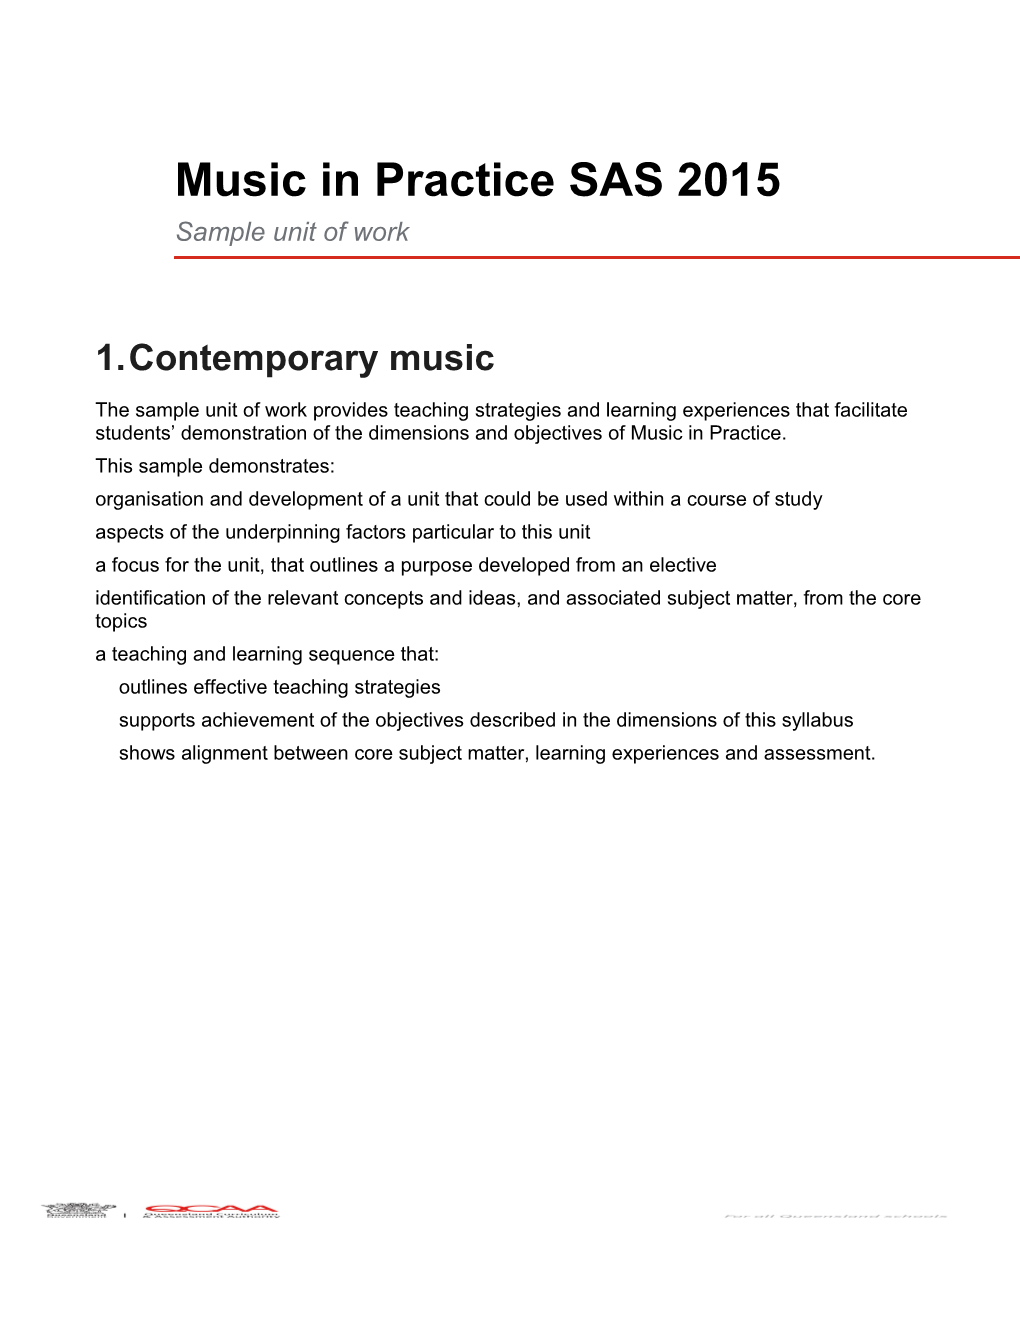 Music in Practice 2015: Contemporary Music Sample Unit of Work